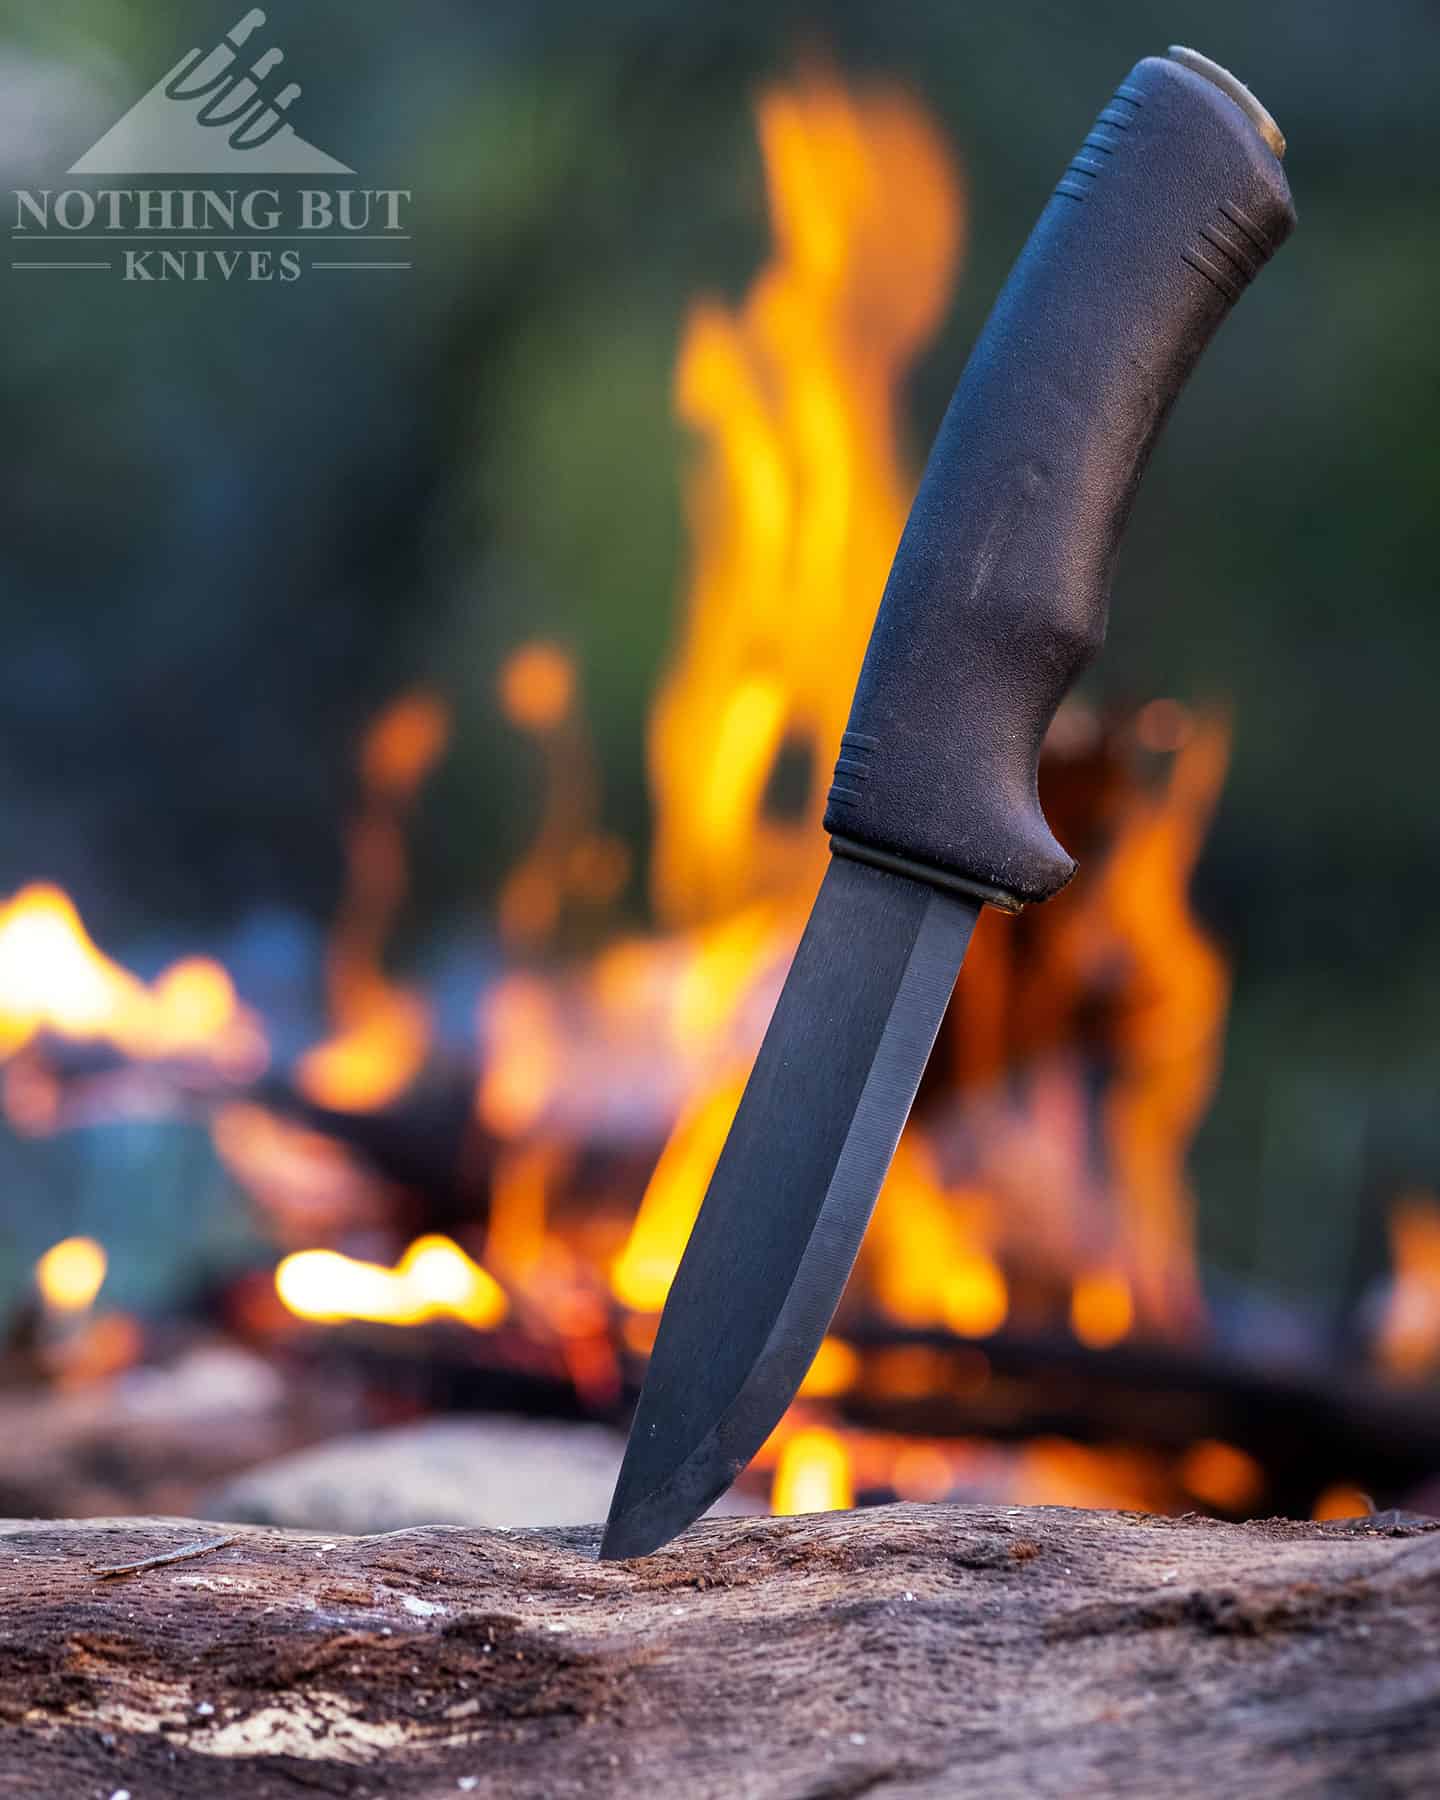 REVIEW: The new updated MORAKNIV CLASSICS, the timeless bushcraft knives -  Knives Illustrated